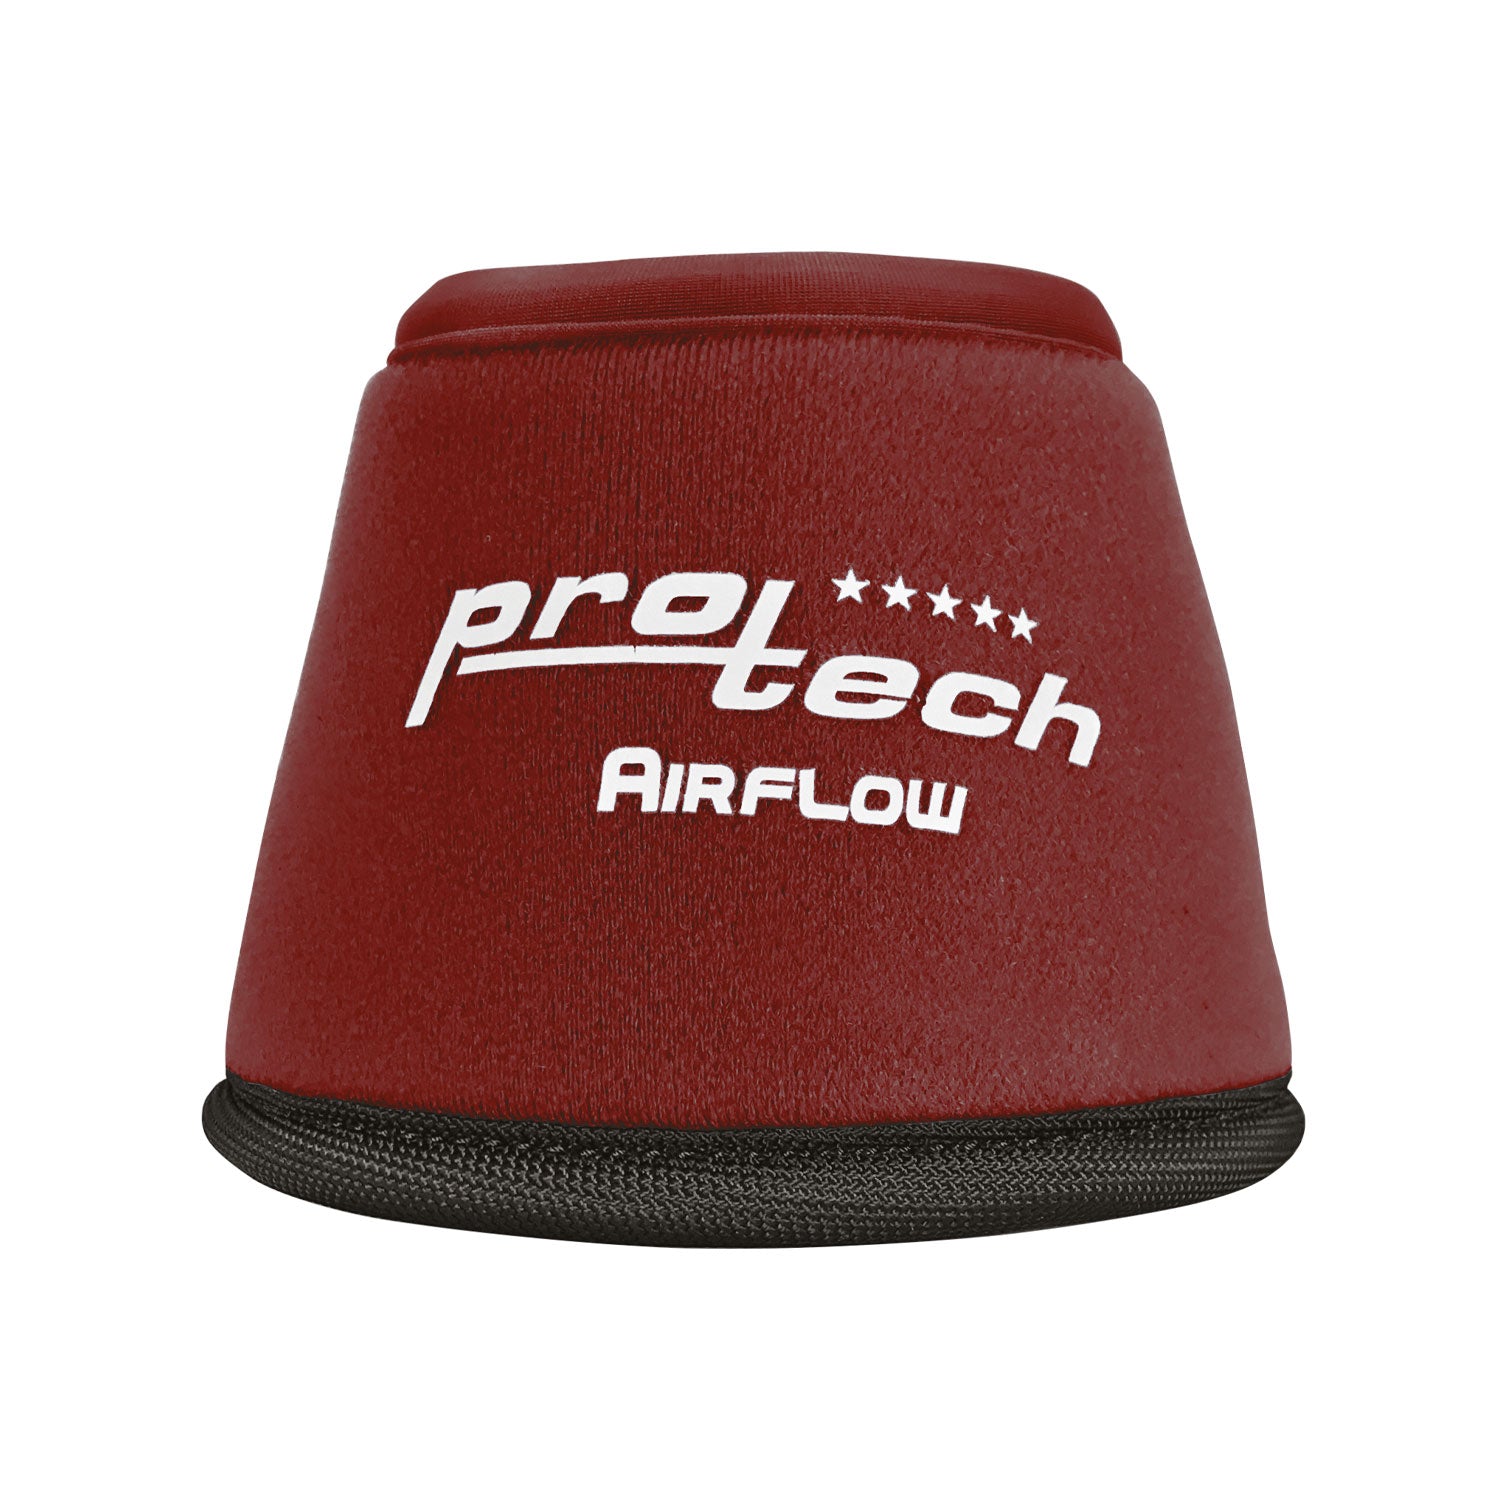 AIRFLOW PERFORMA bell boots